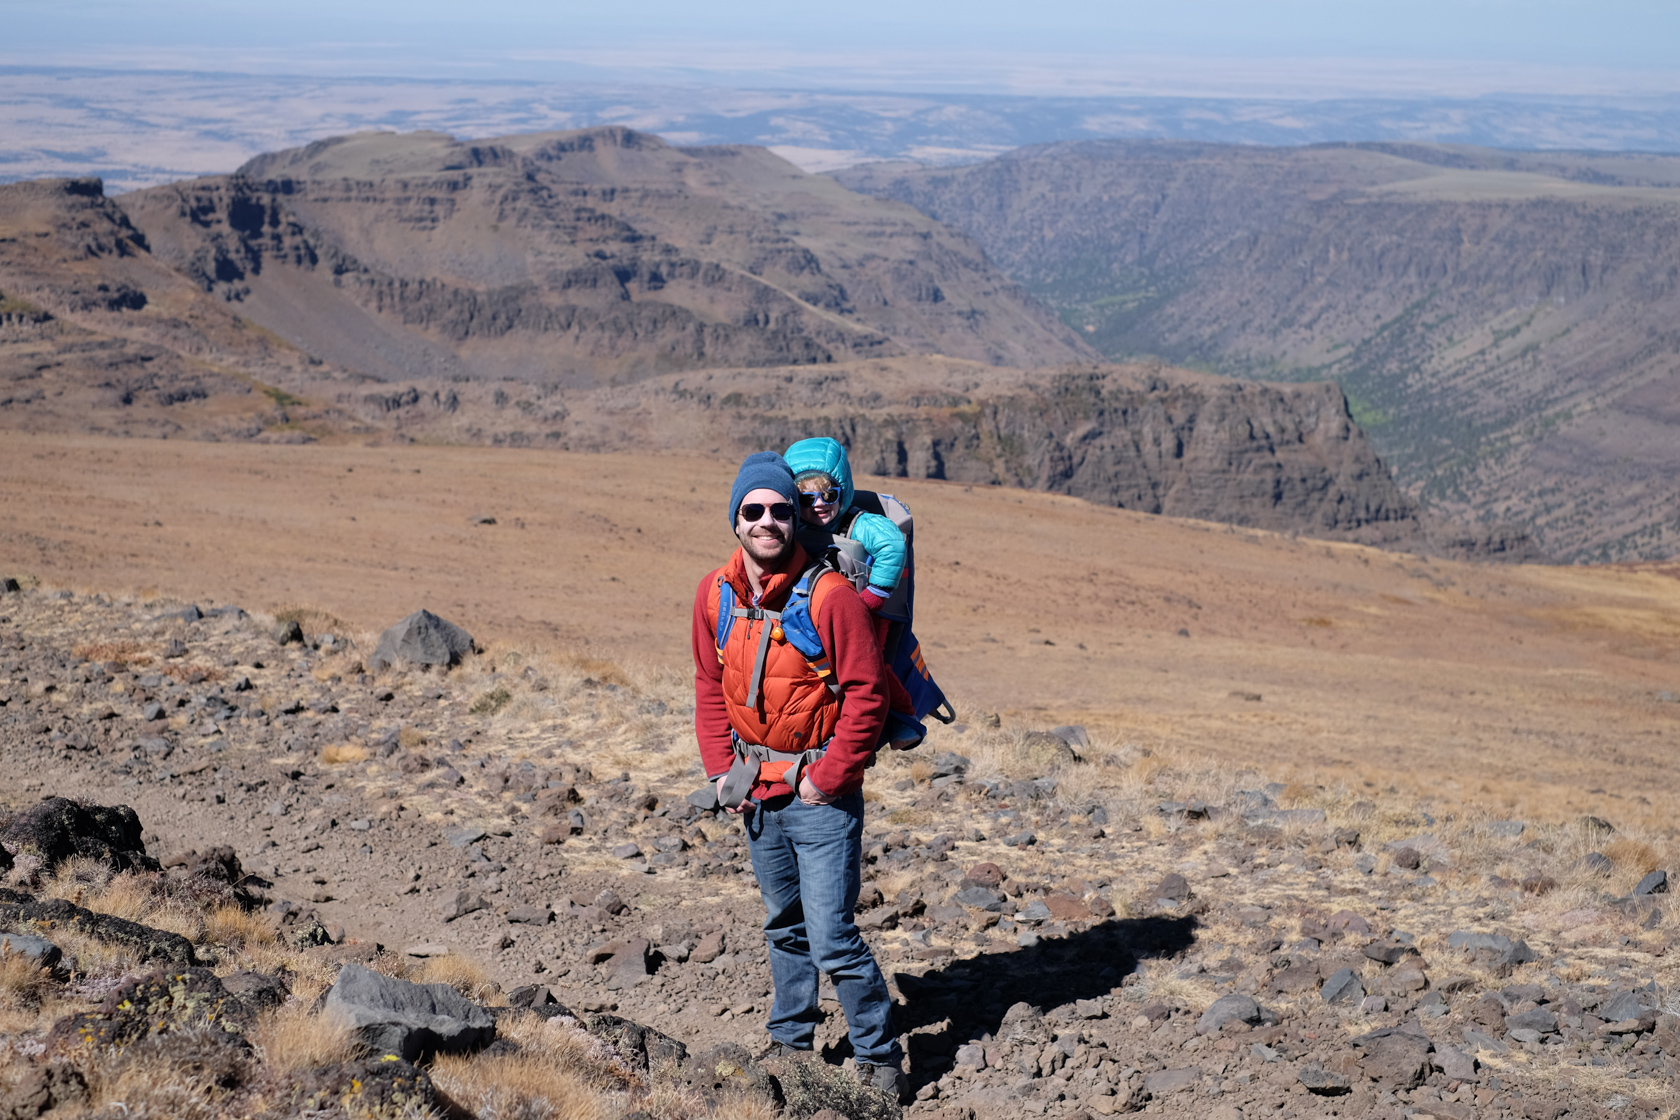 We drove up to the summit of Steens Mountain. It was windier than hell, and cold too, but once we hiked down into one of the nearby canyons it was much more pleasant.